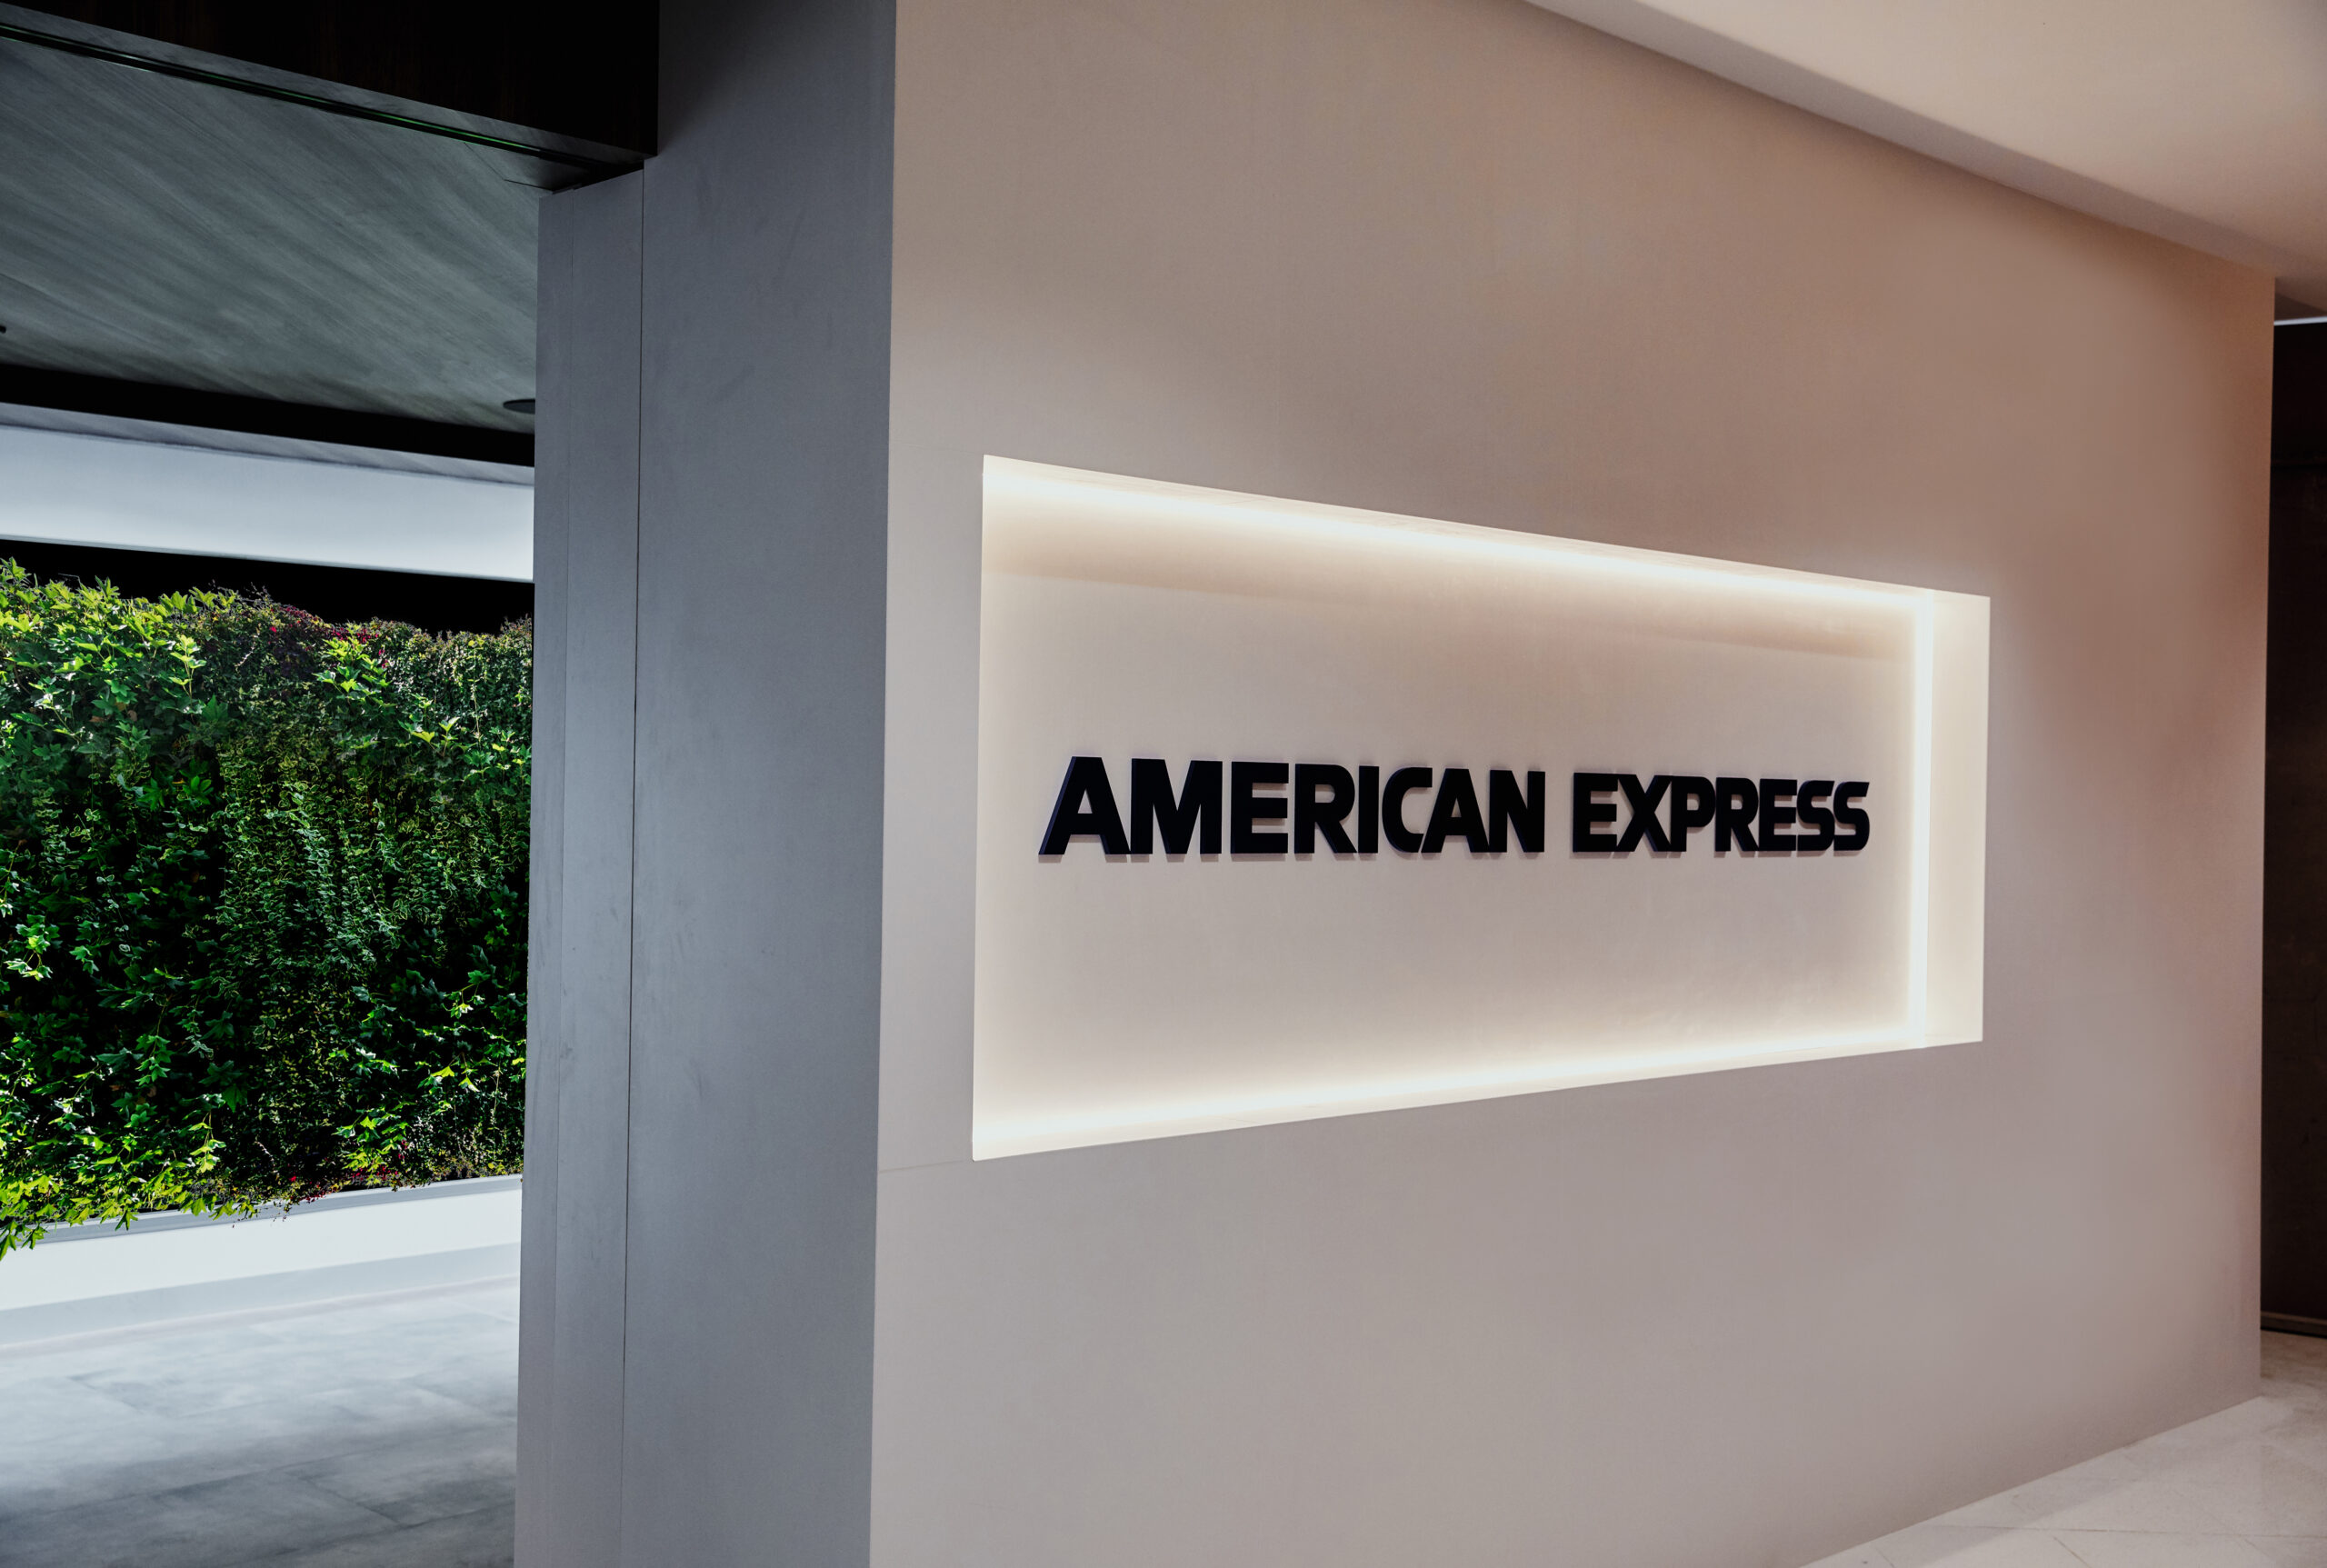 American Express Sydney Lounge: The Exclusive Suite That You Can Only Access There